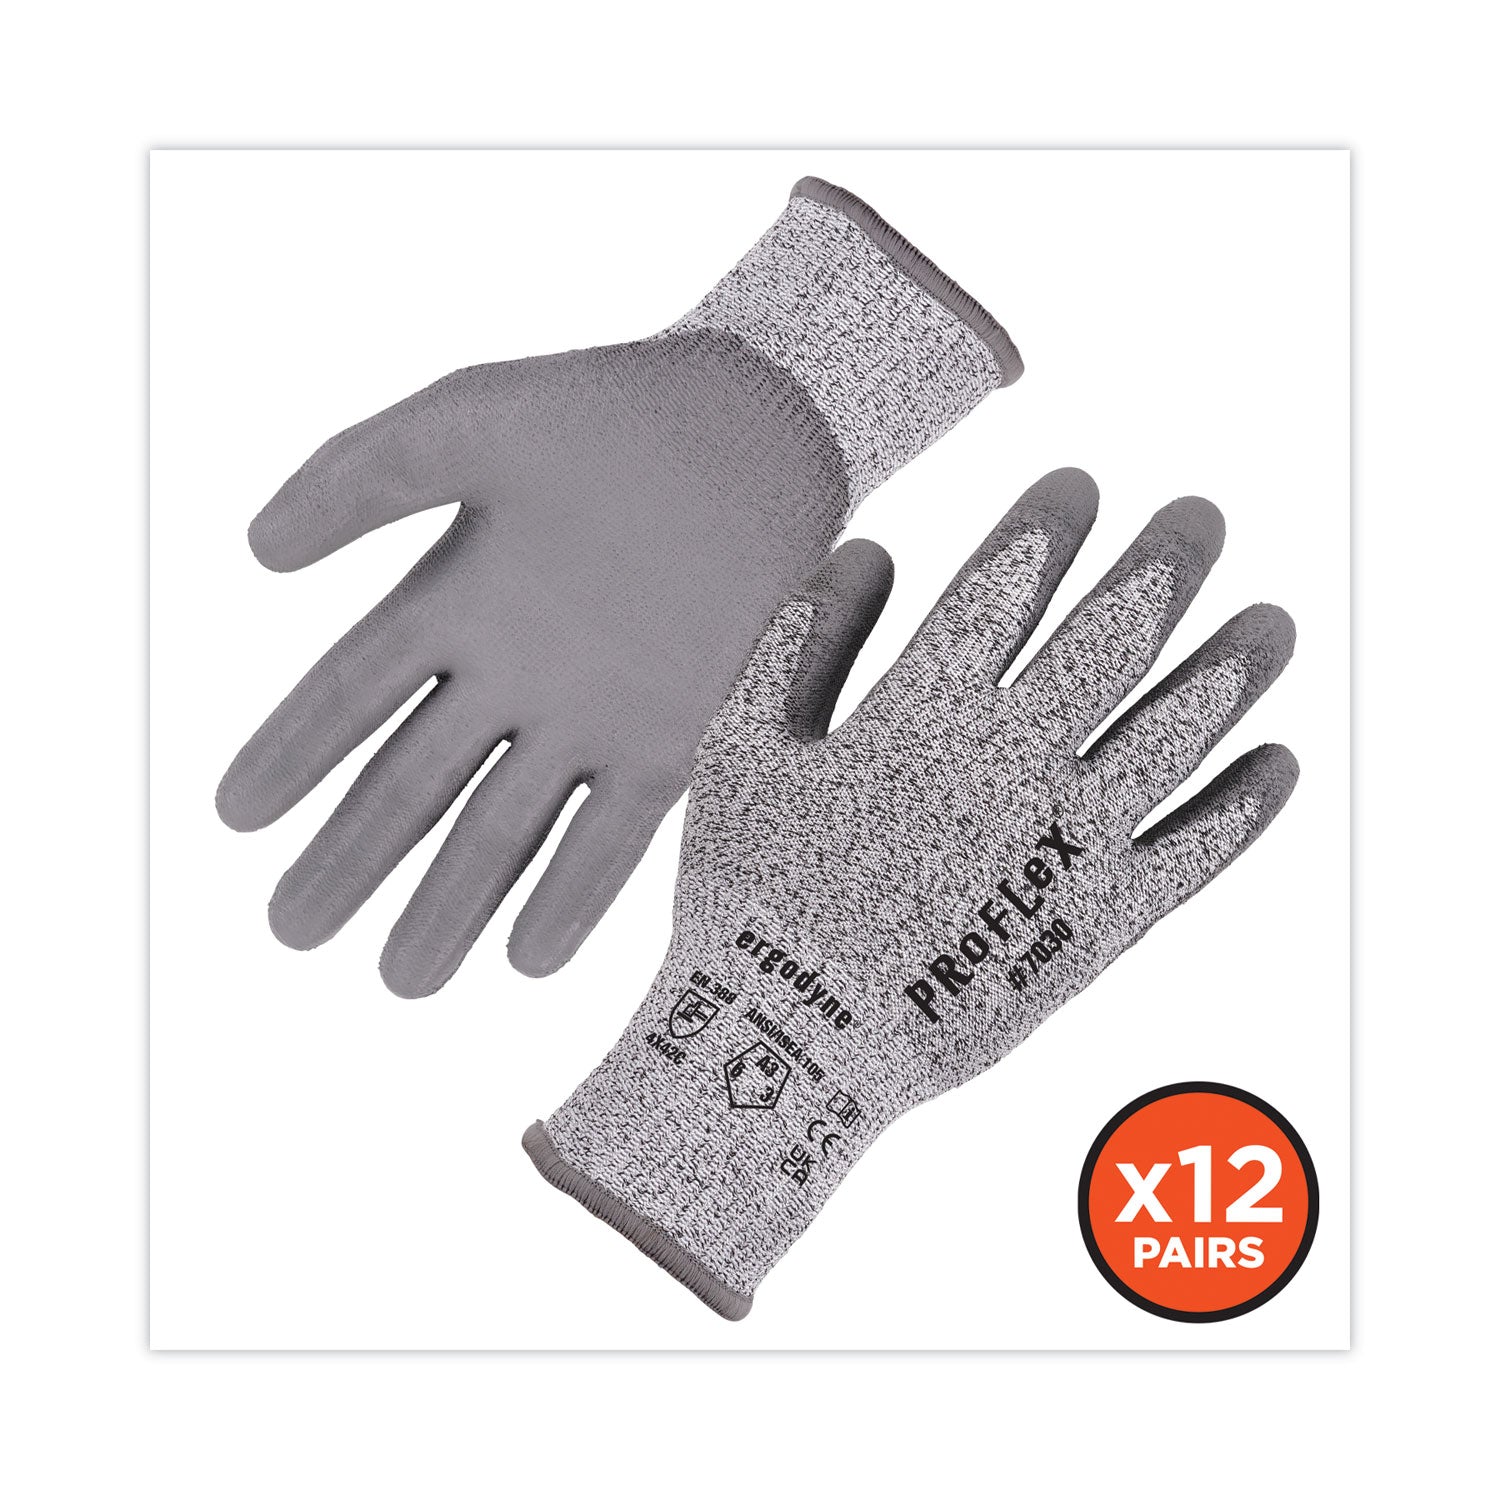 proflex-7030-ansi-a3-pu-coated-cr-gloves-gray-medium-12-pairs-pack-ships-in-1-3-business-days_ego10453 - 2